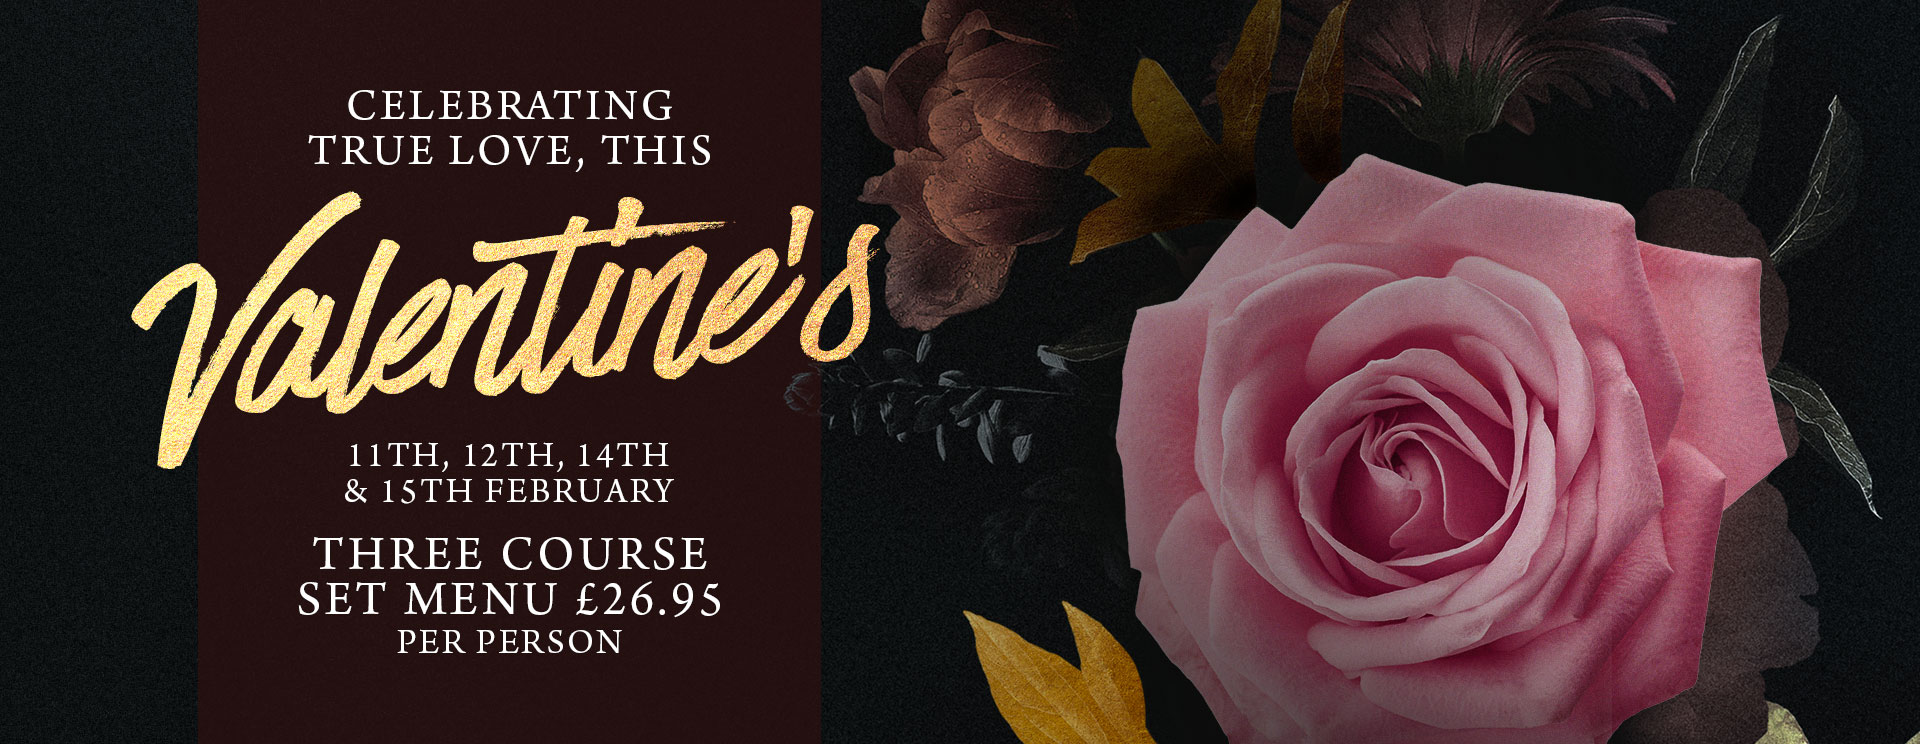 Valentines at The Fishery Inn